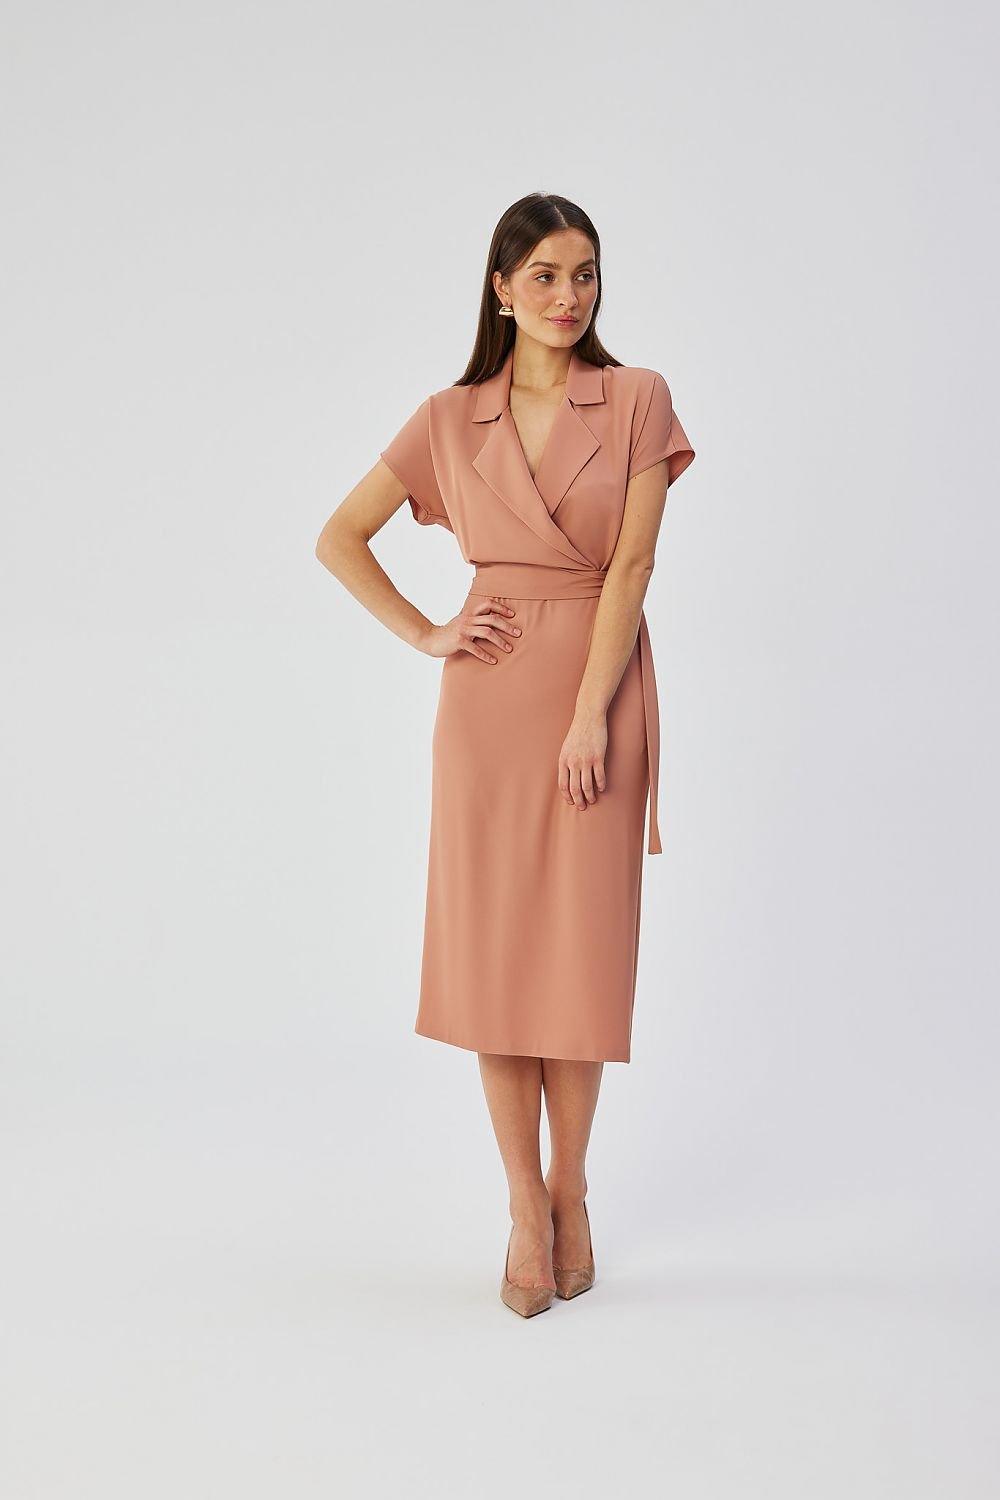 Daydress model 193428 Stylove - Lucianne Boutique